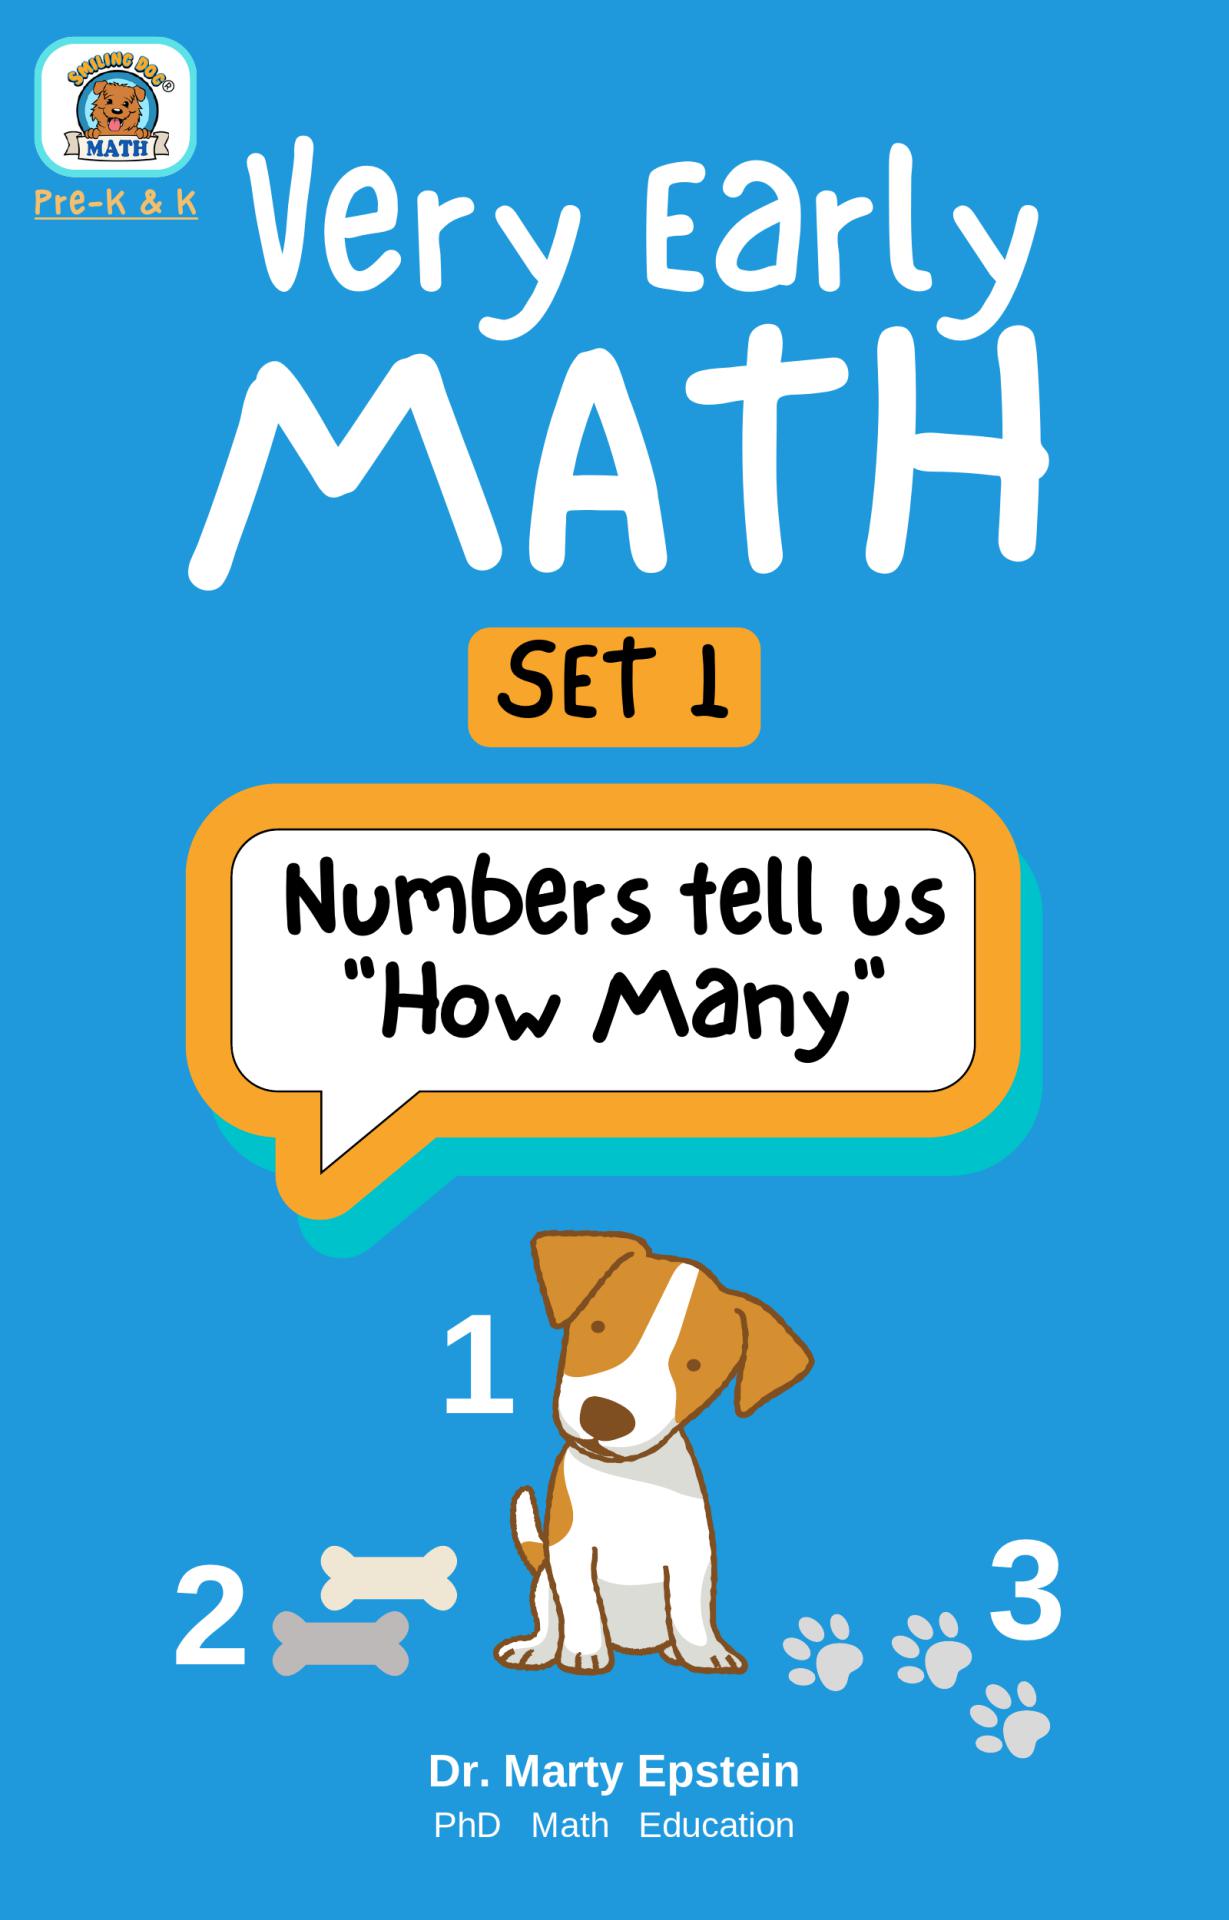 Very Early MATH: SET 1 - Numbers tell us "How Many"